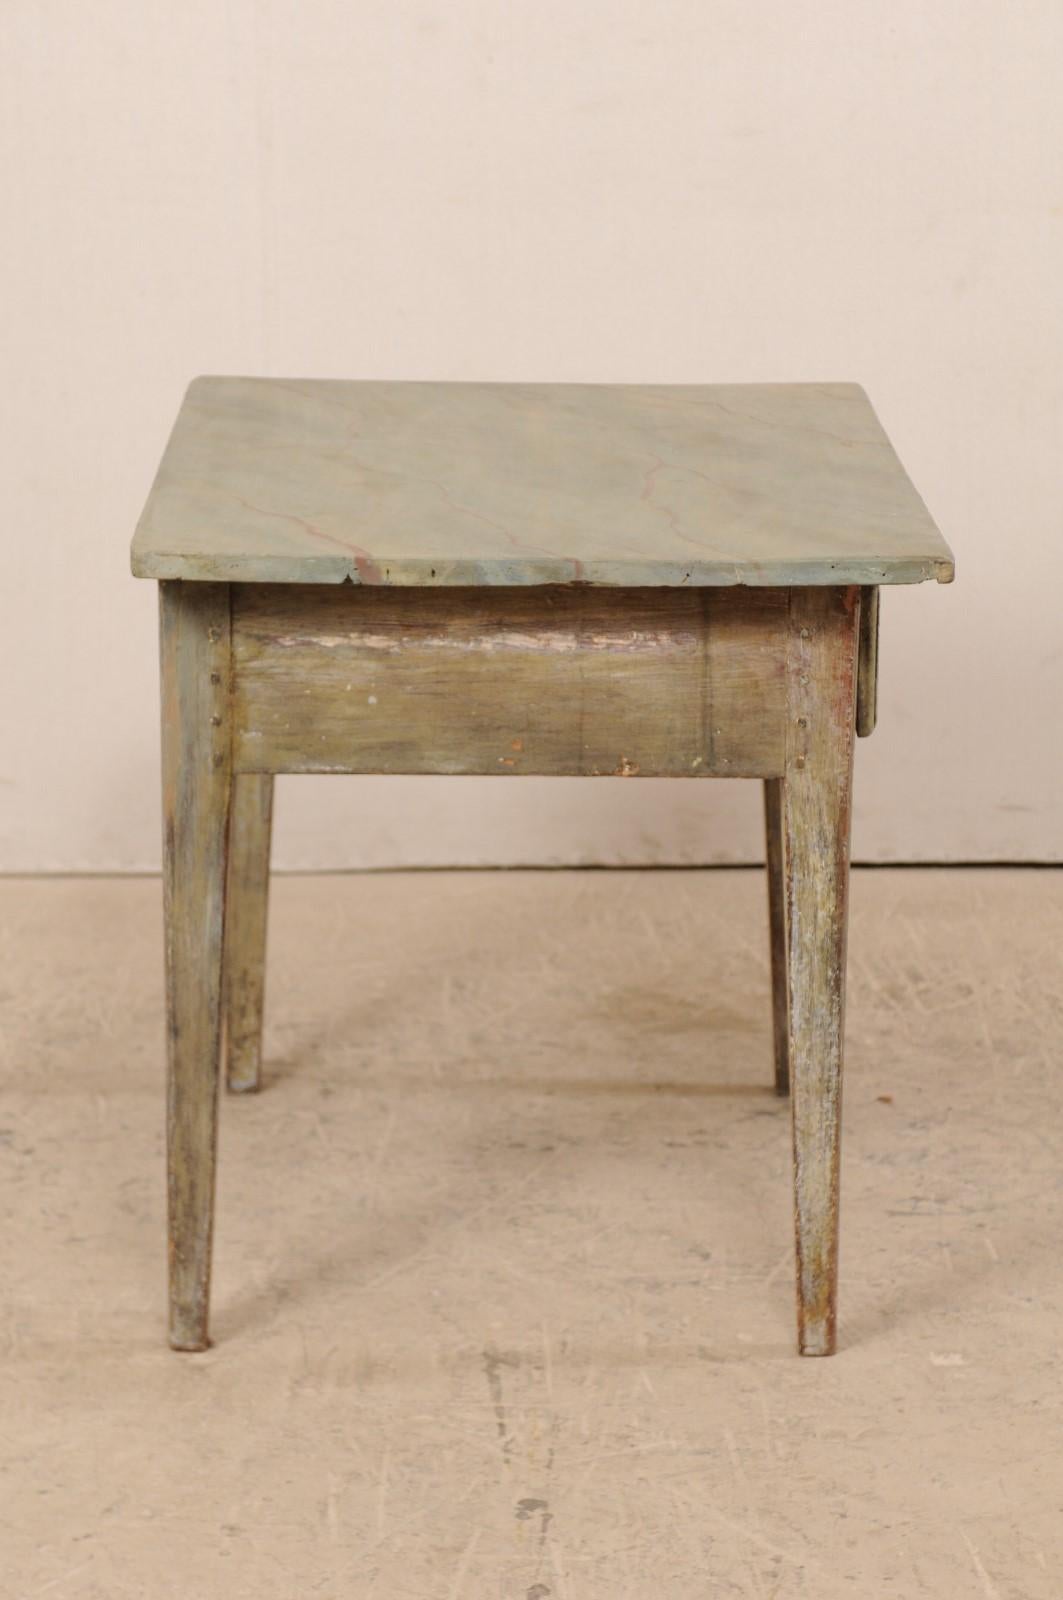 Swedish 19th Century Painted Wood Table with Faux Marble Top In Good Condition For Sale In Atlanta, GA